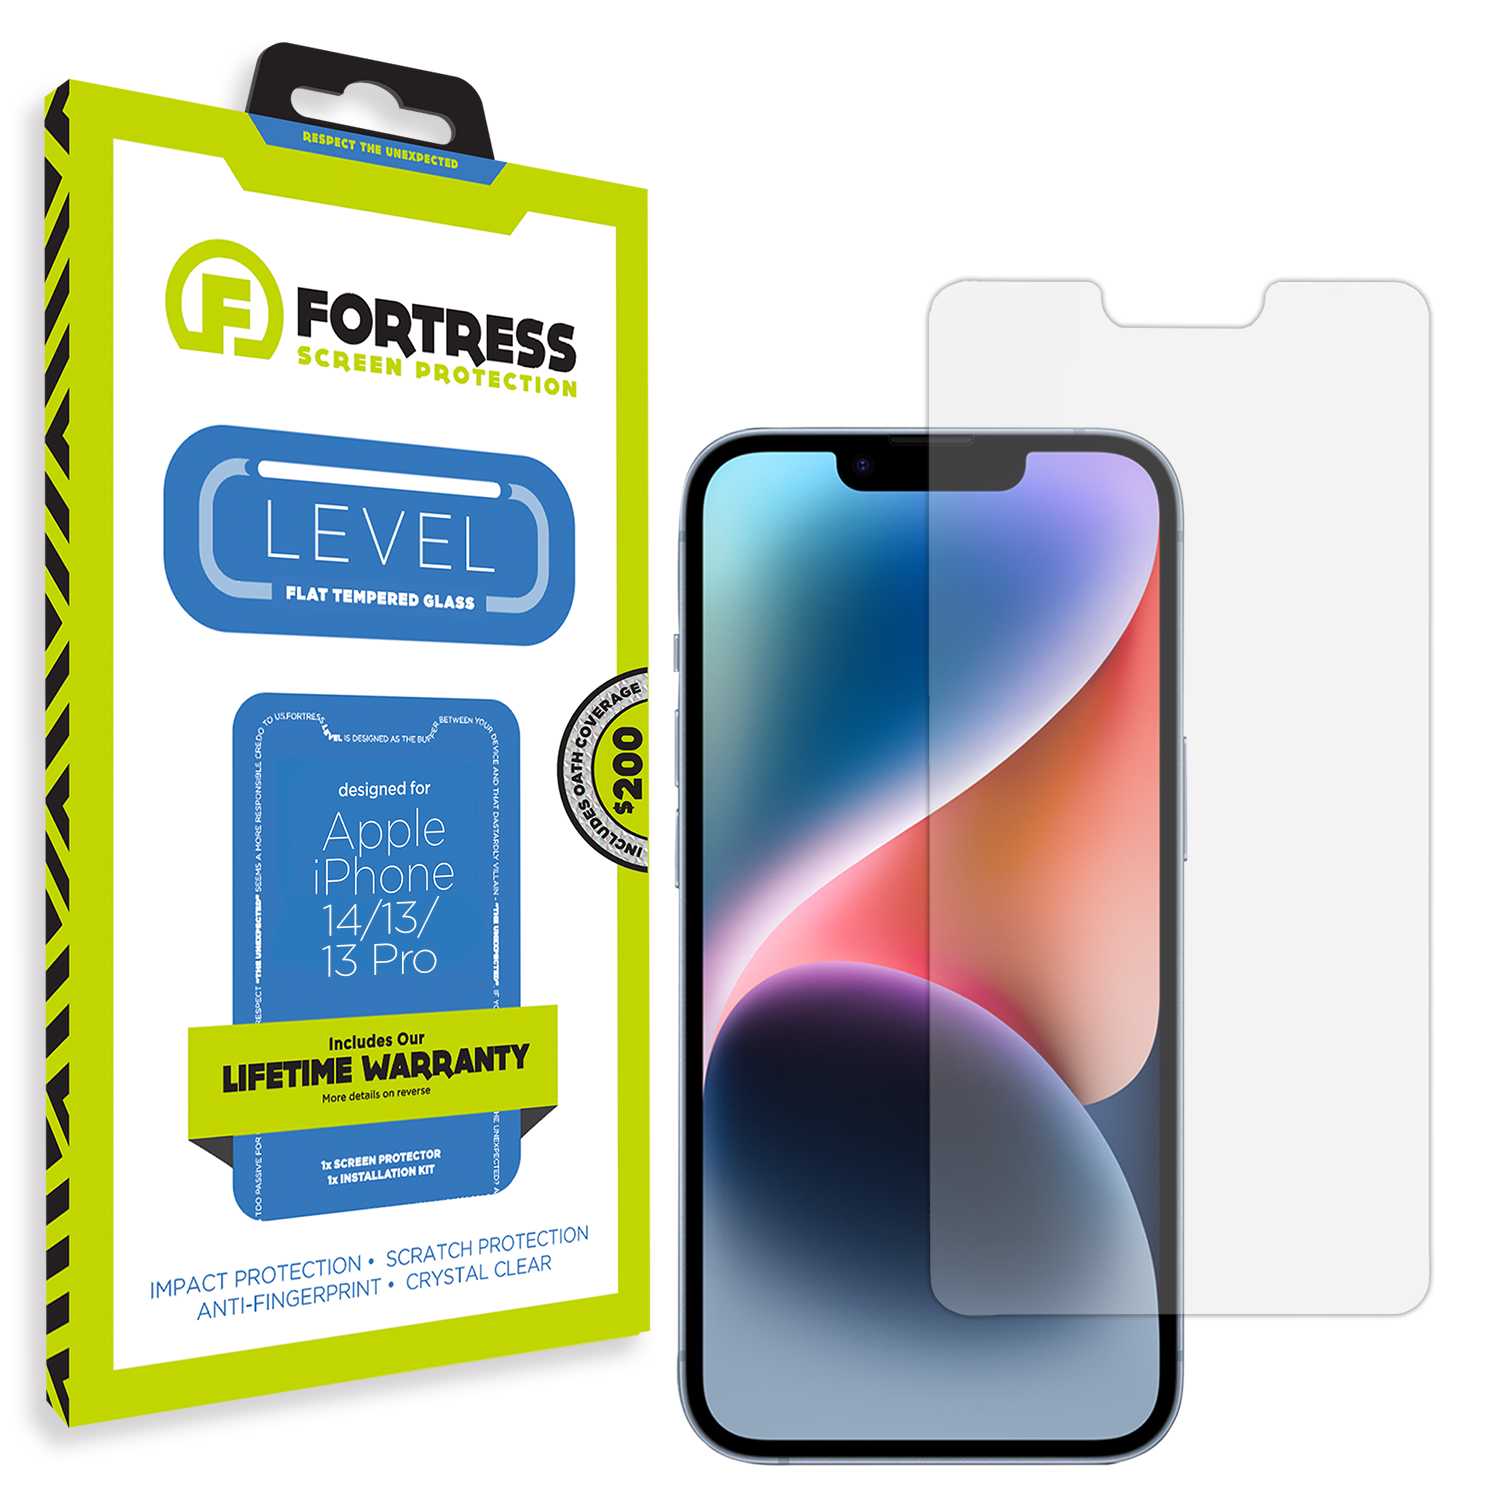 Fortress iPhone 13 Pro Screen Protector $200Coverage Scooch Screen Protector